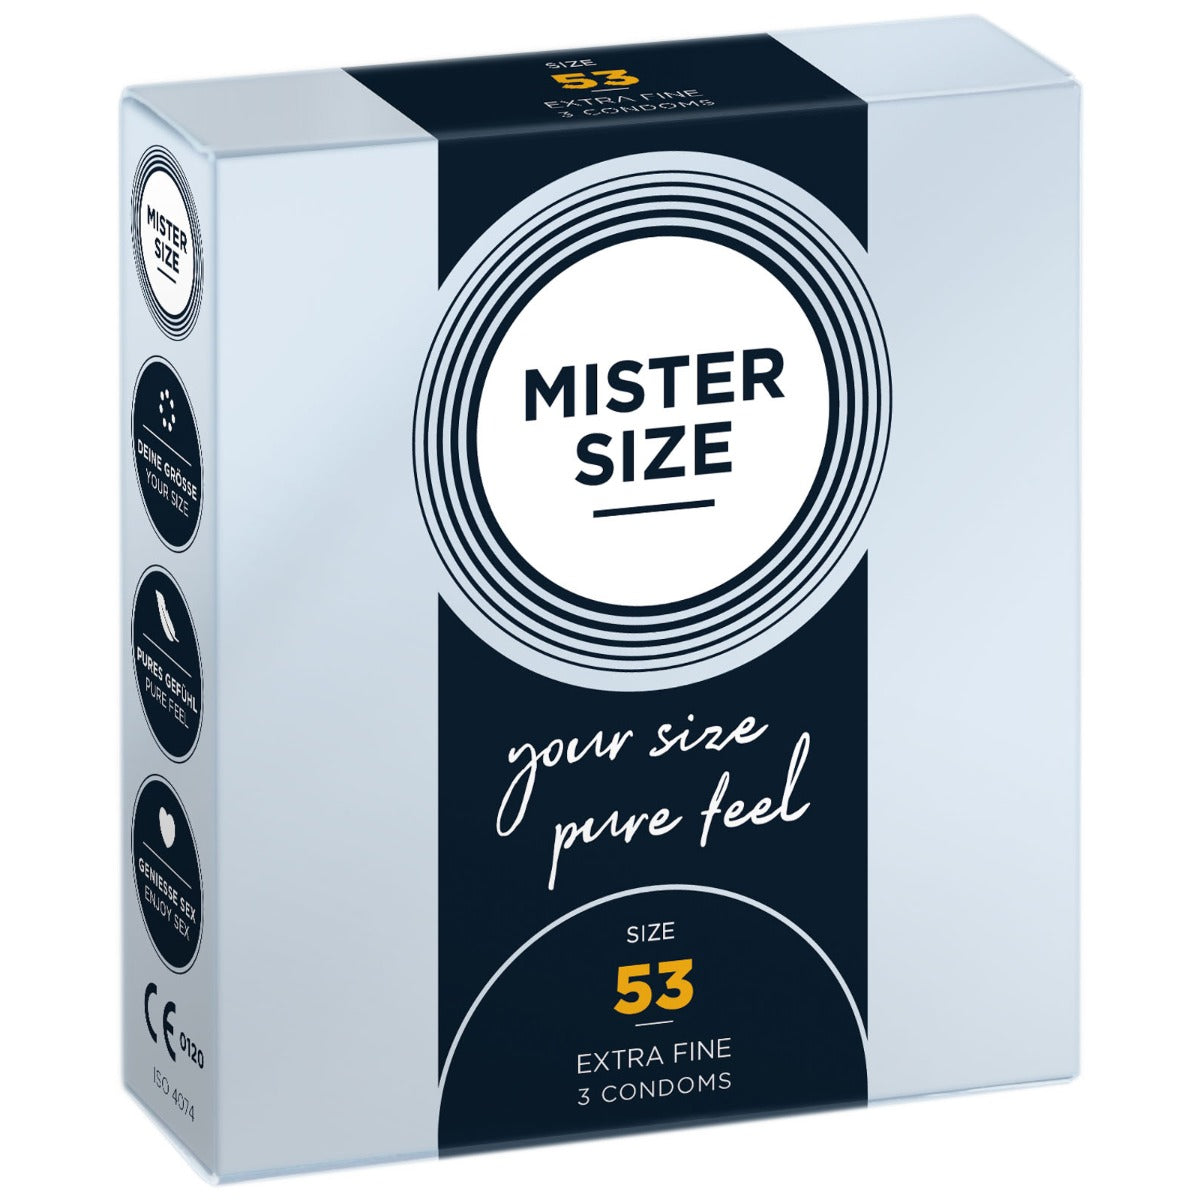 MISTER SIZE | Pure feel Condoms - size 53 mm (3 pack)